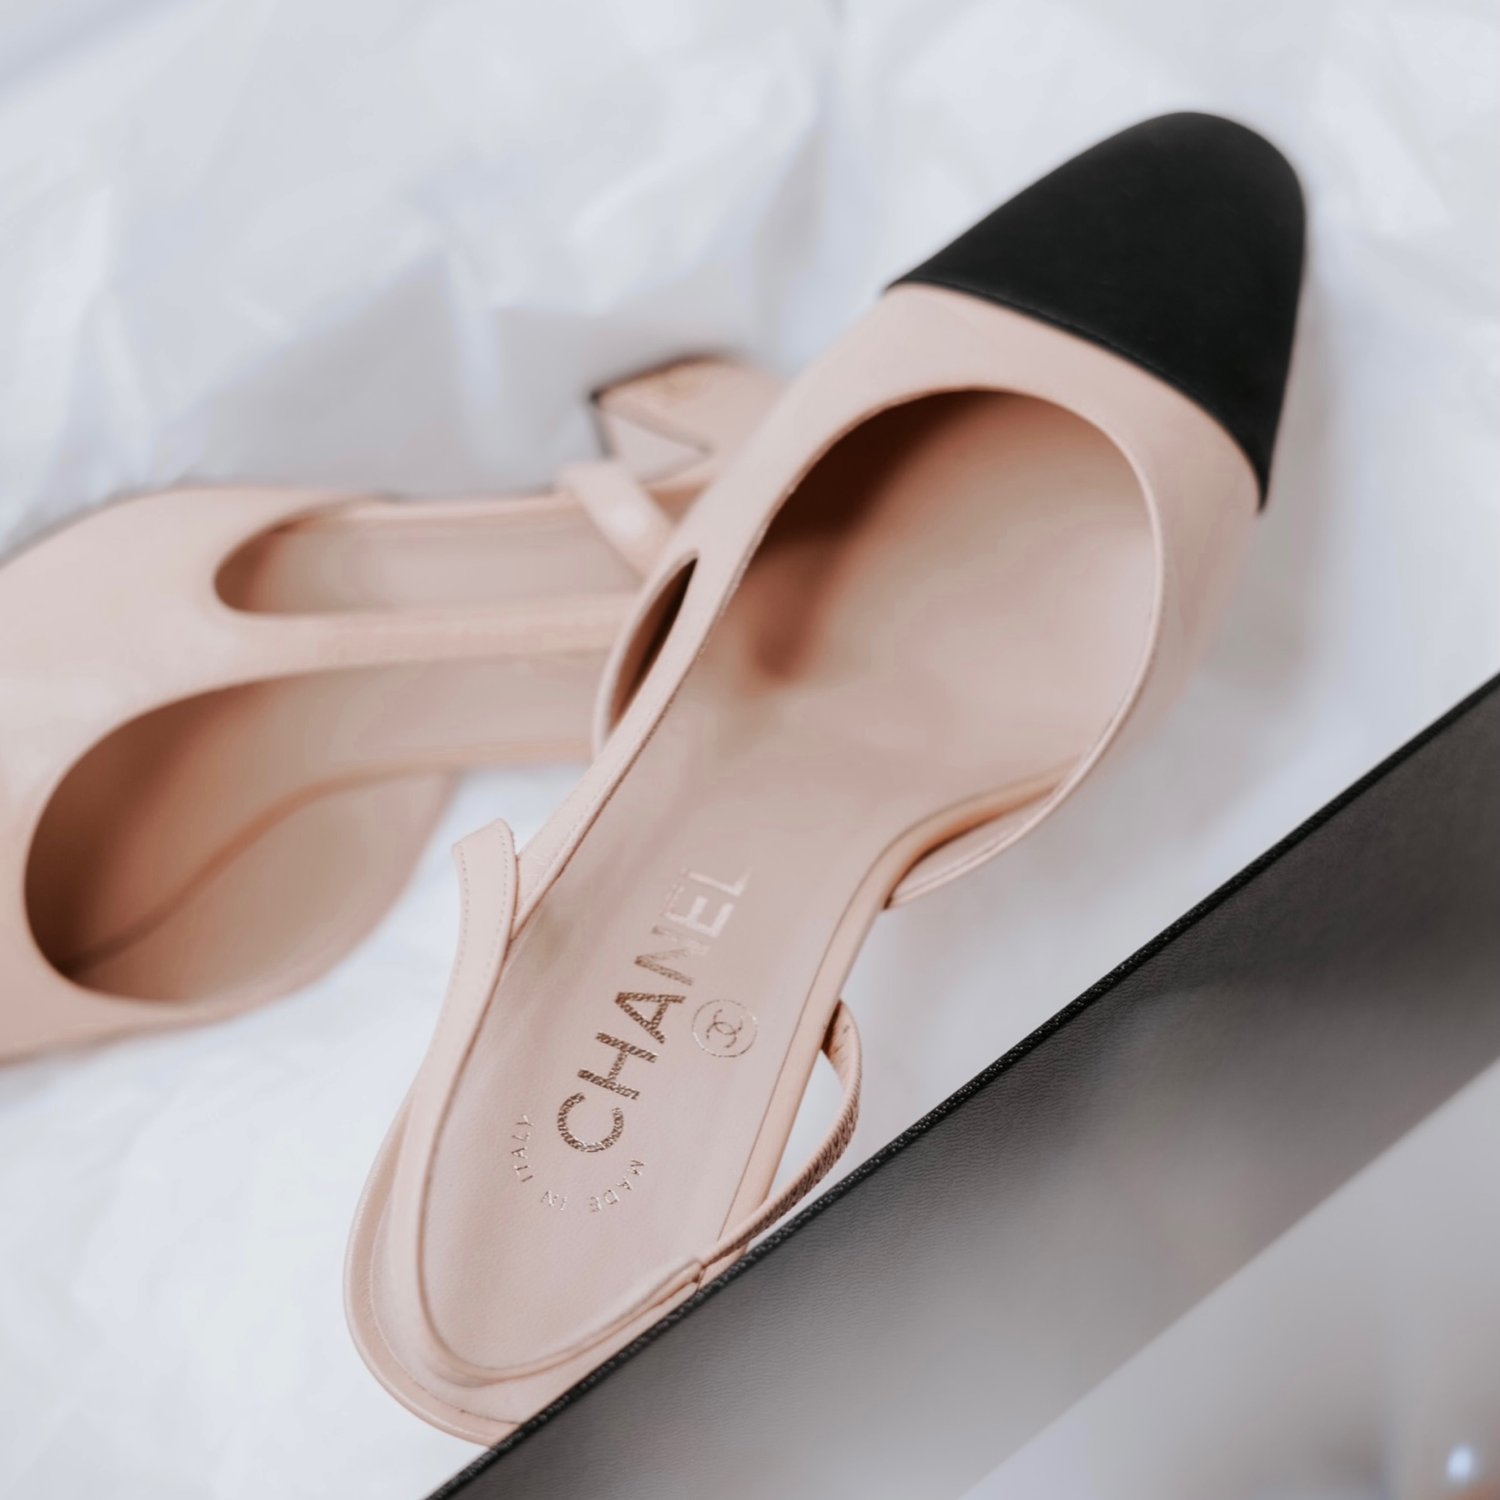 These Slingback Heels Are An Exact Replica Of An £870 Luxury Shoe